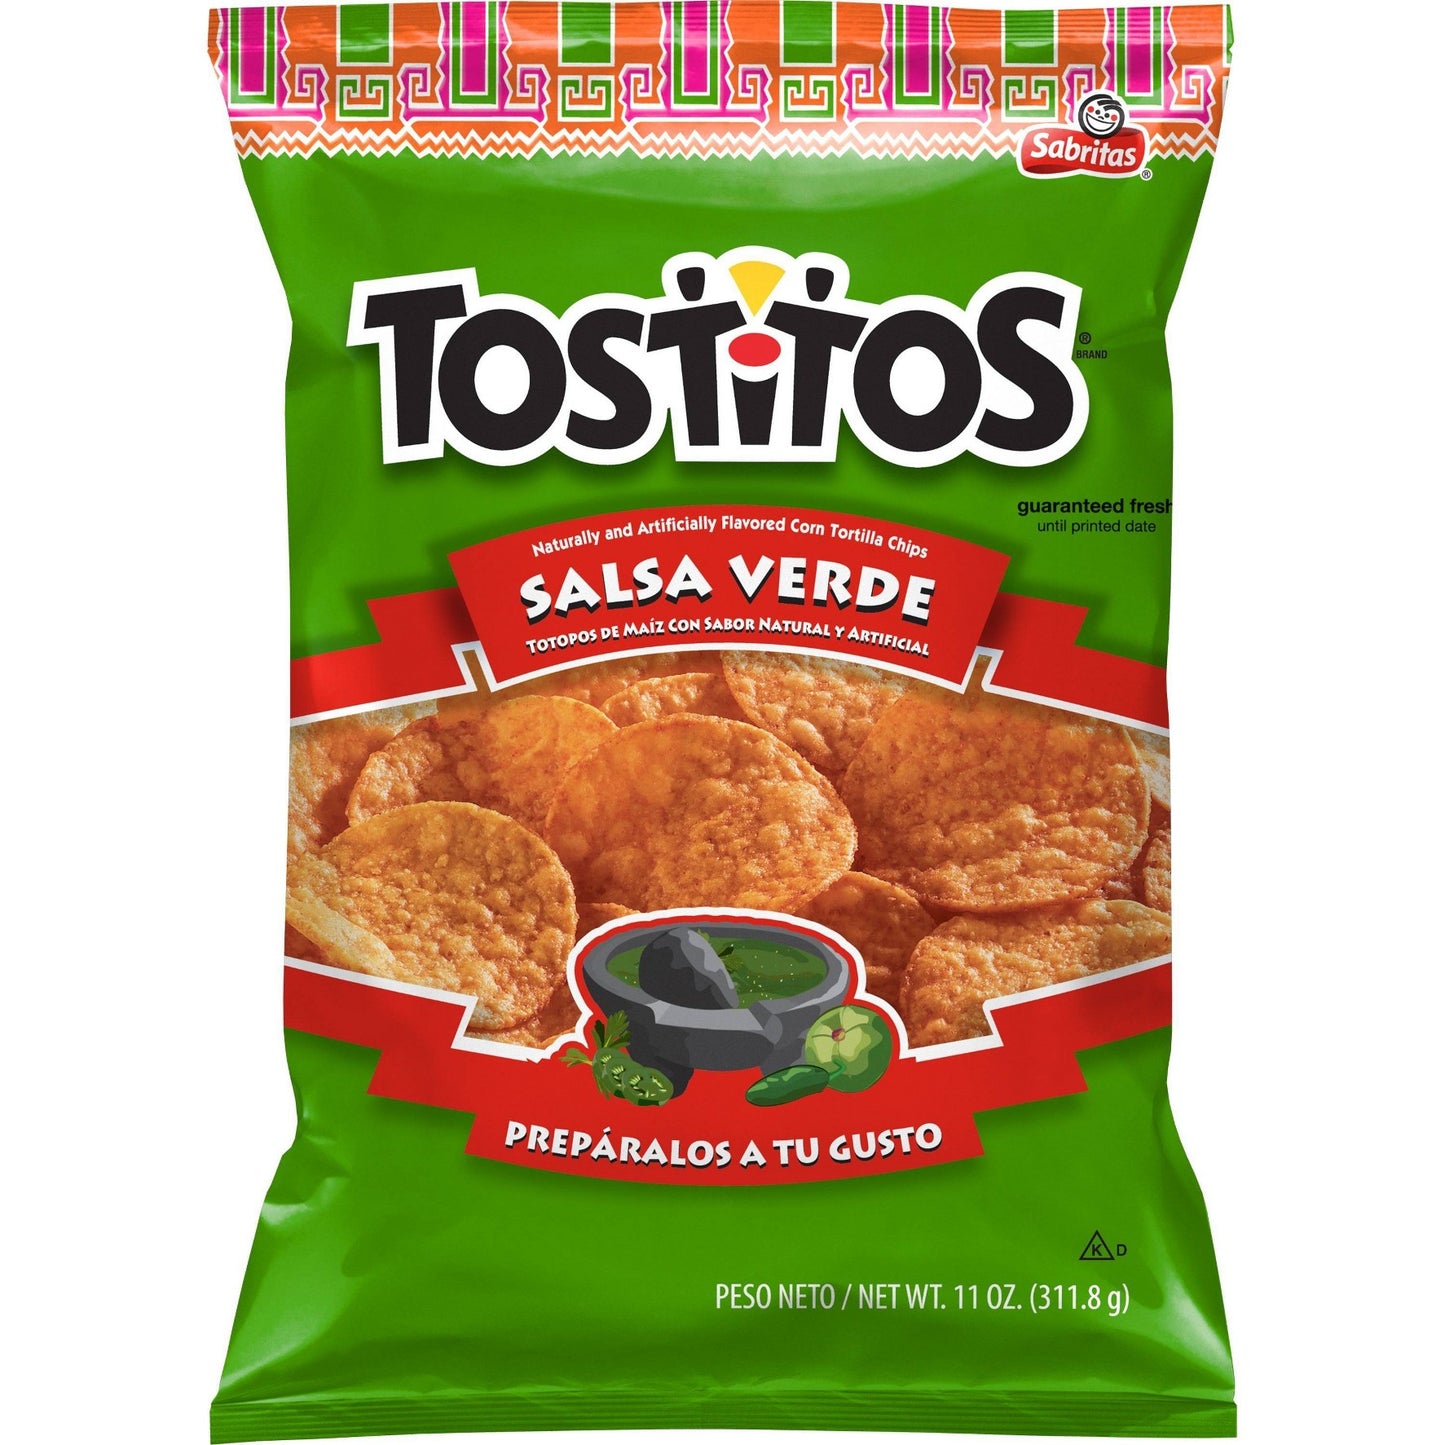 USA Wholesale Chips 6.0 to 8.5 OZ - 12 Pack - Mixed Assortment - RARE - Exotic Chips